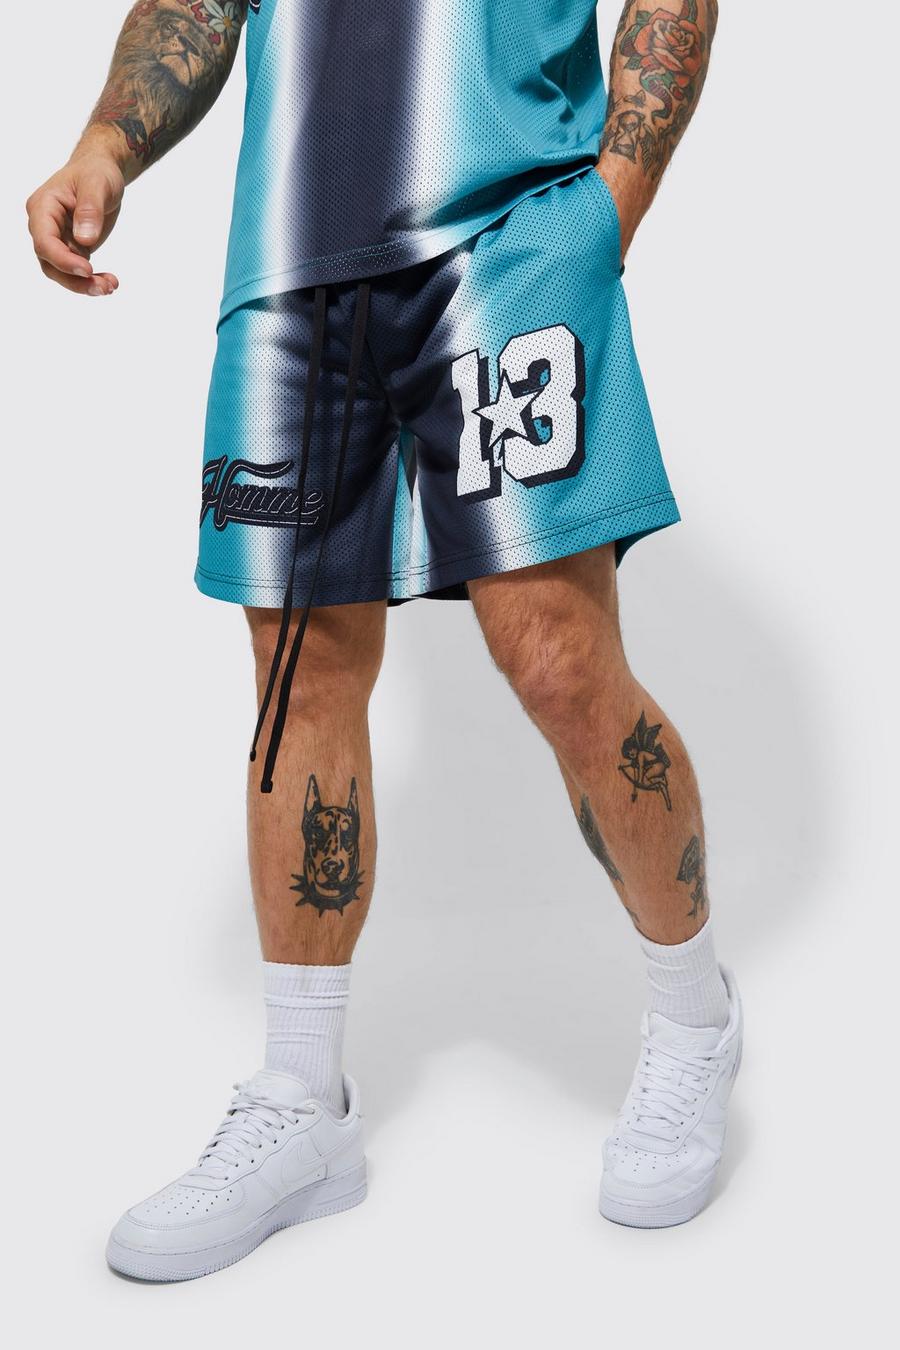 Teal Loose Fit Homme Ombre Print Mesh Basketball Short